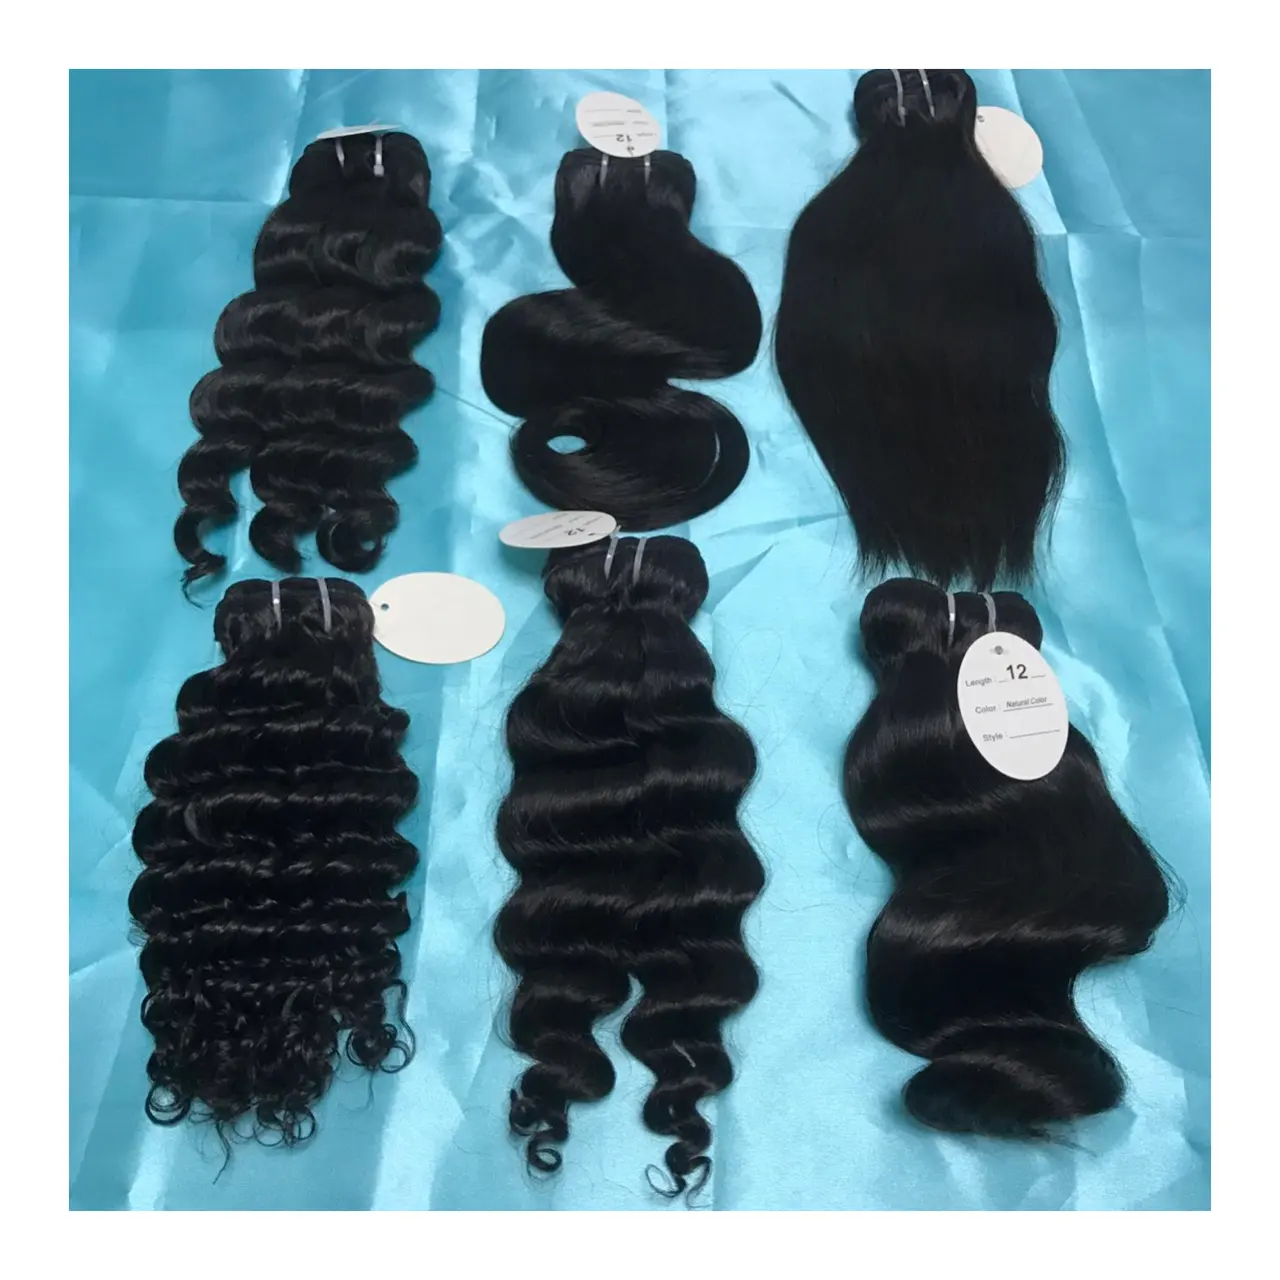 HIGH QUALITY cuticle aligned unprocessed raw virgin indian human hair bundles toupee